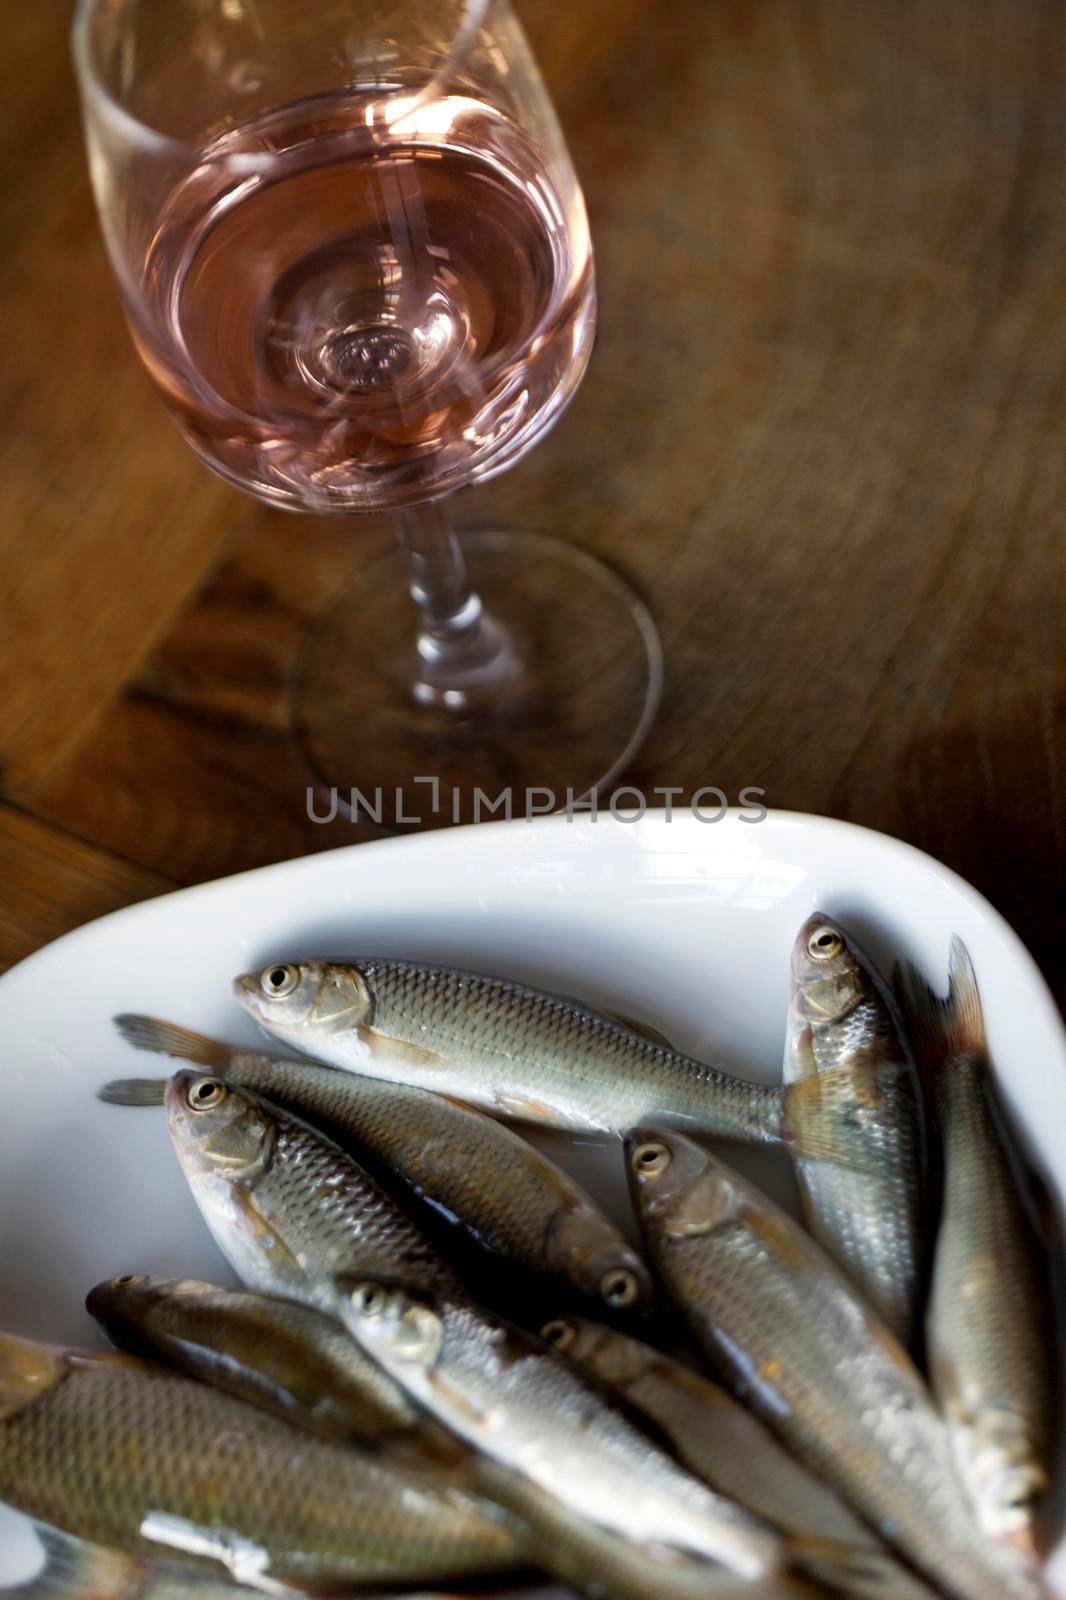 Fishes and wine by jacques_palut